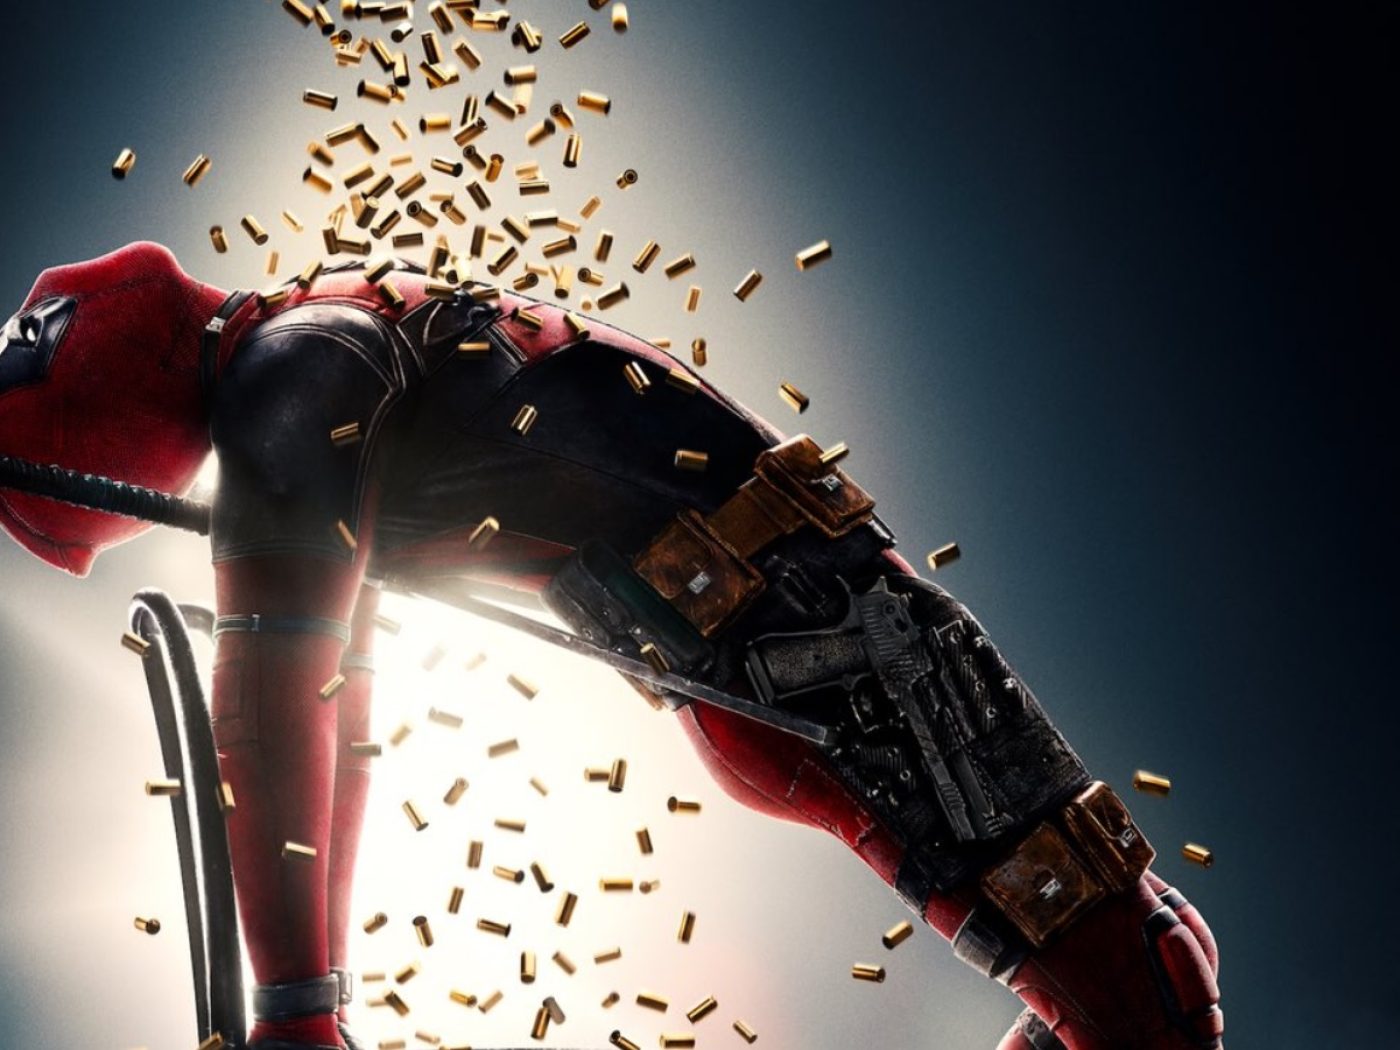 The MCU Finally References Deadpool, but Is It Canon? - Inside the